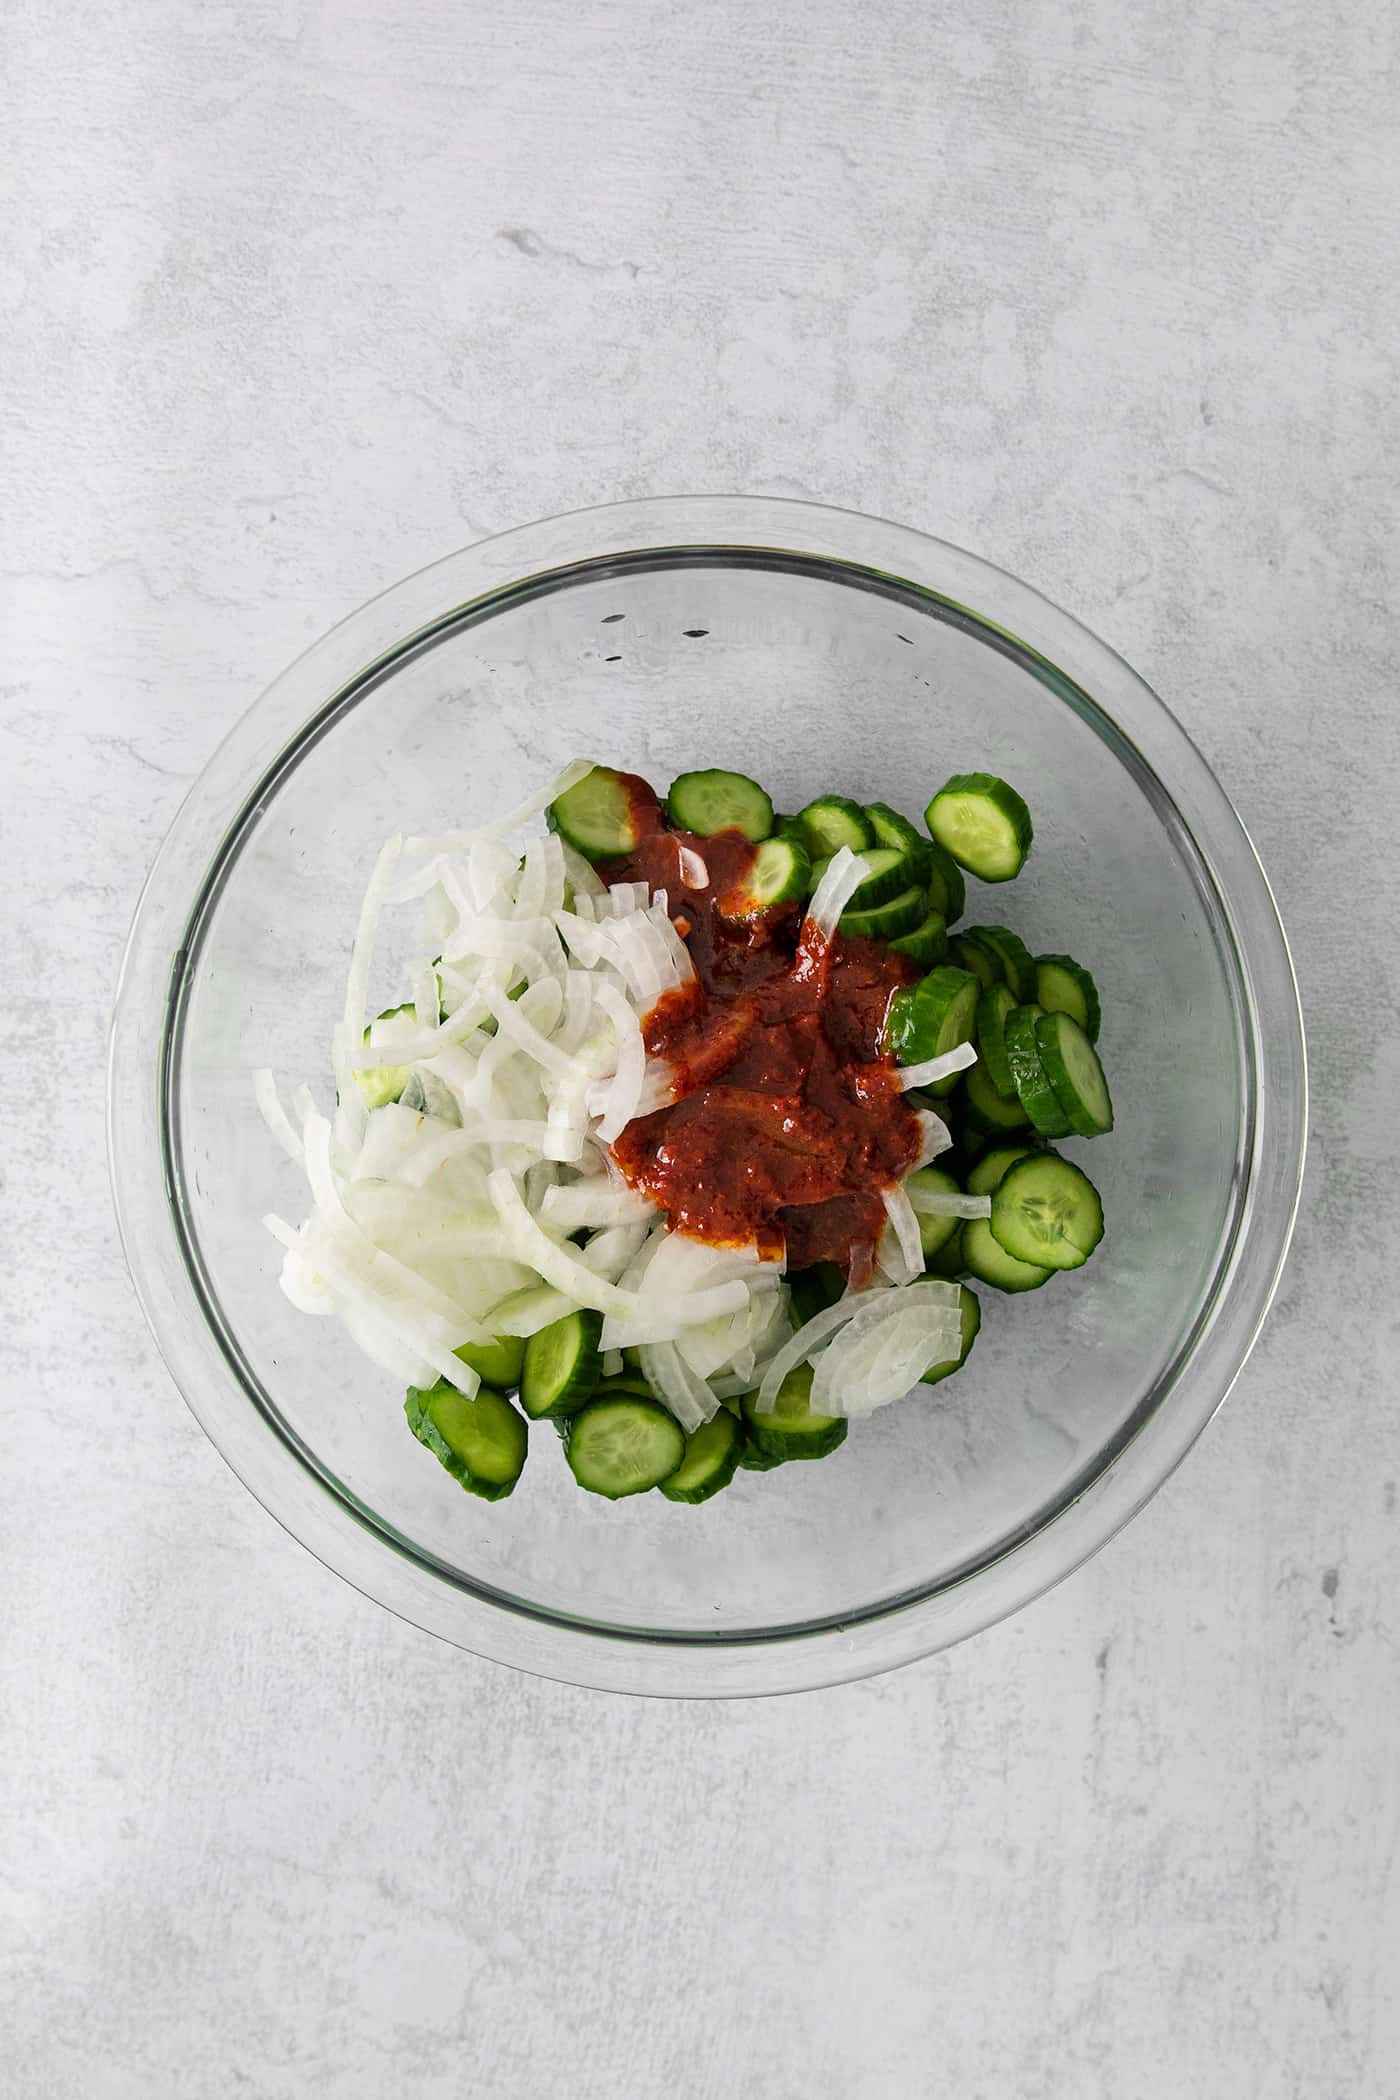 Cucumber slices, white onions, and kimchi sauce in a dish